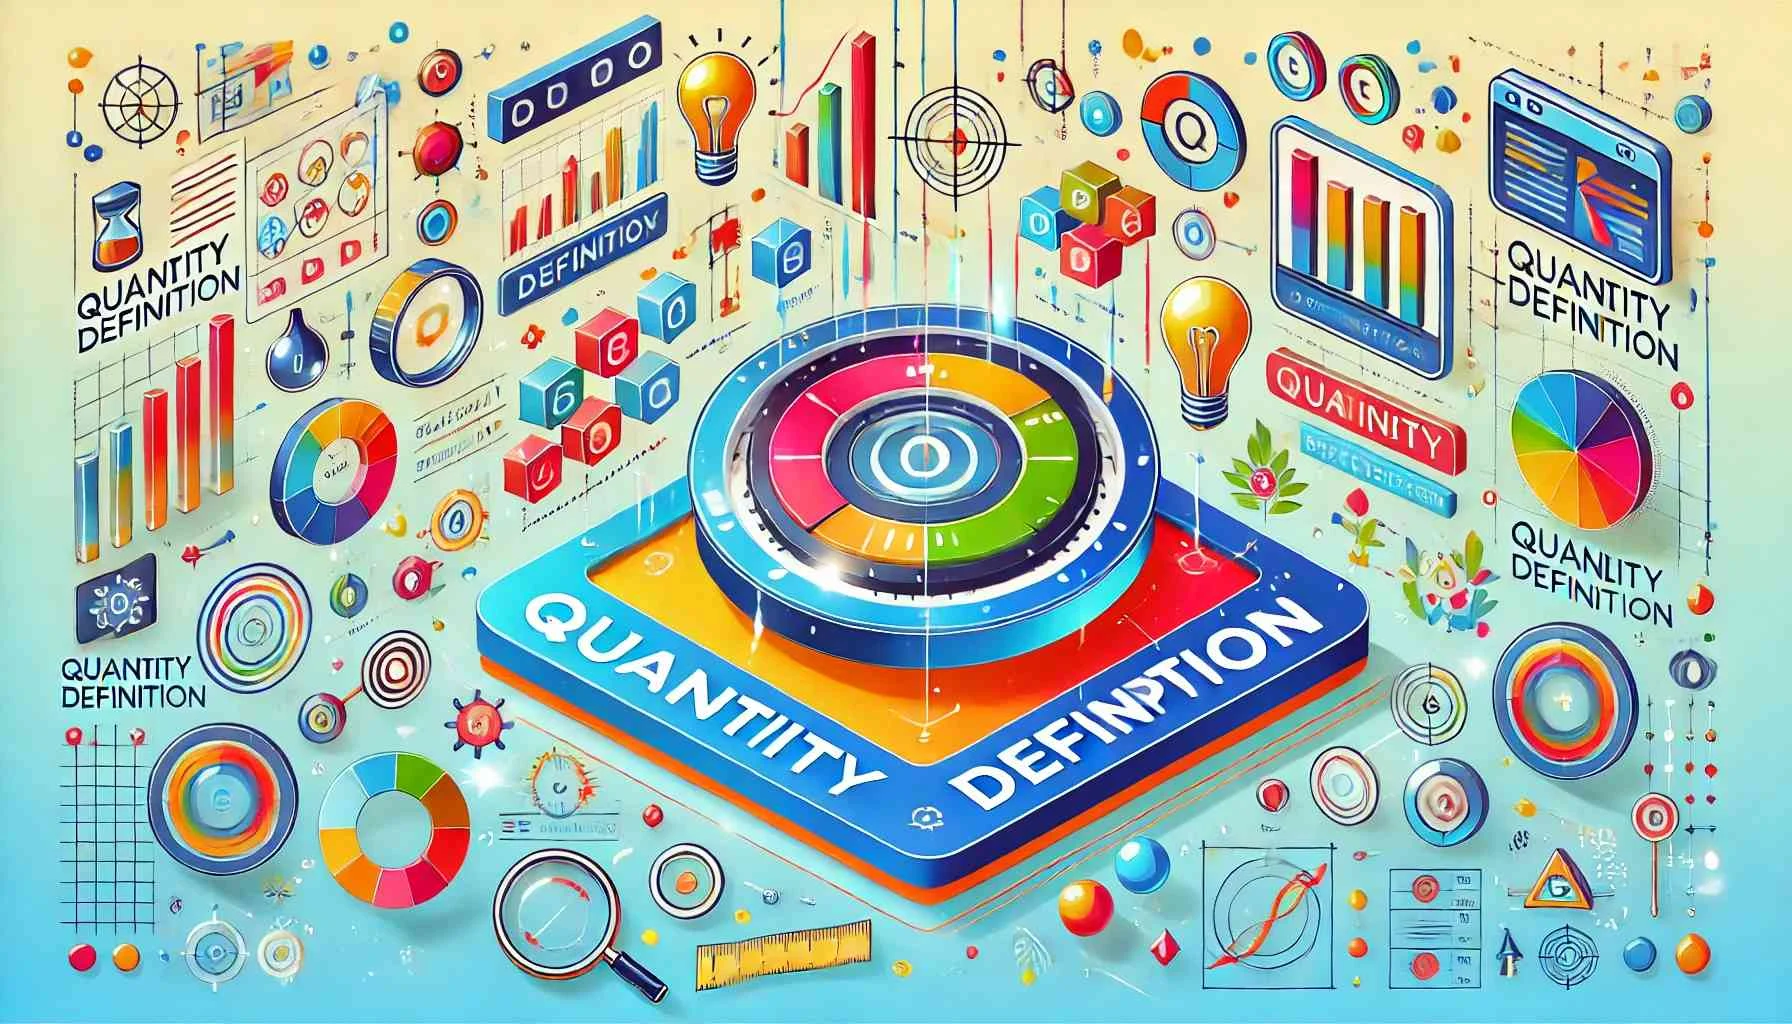 Themed Illustration Depicting The Concept Of Quantity Definition. The Image Should Use Vibrant And Modern Colors W 20240714